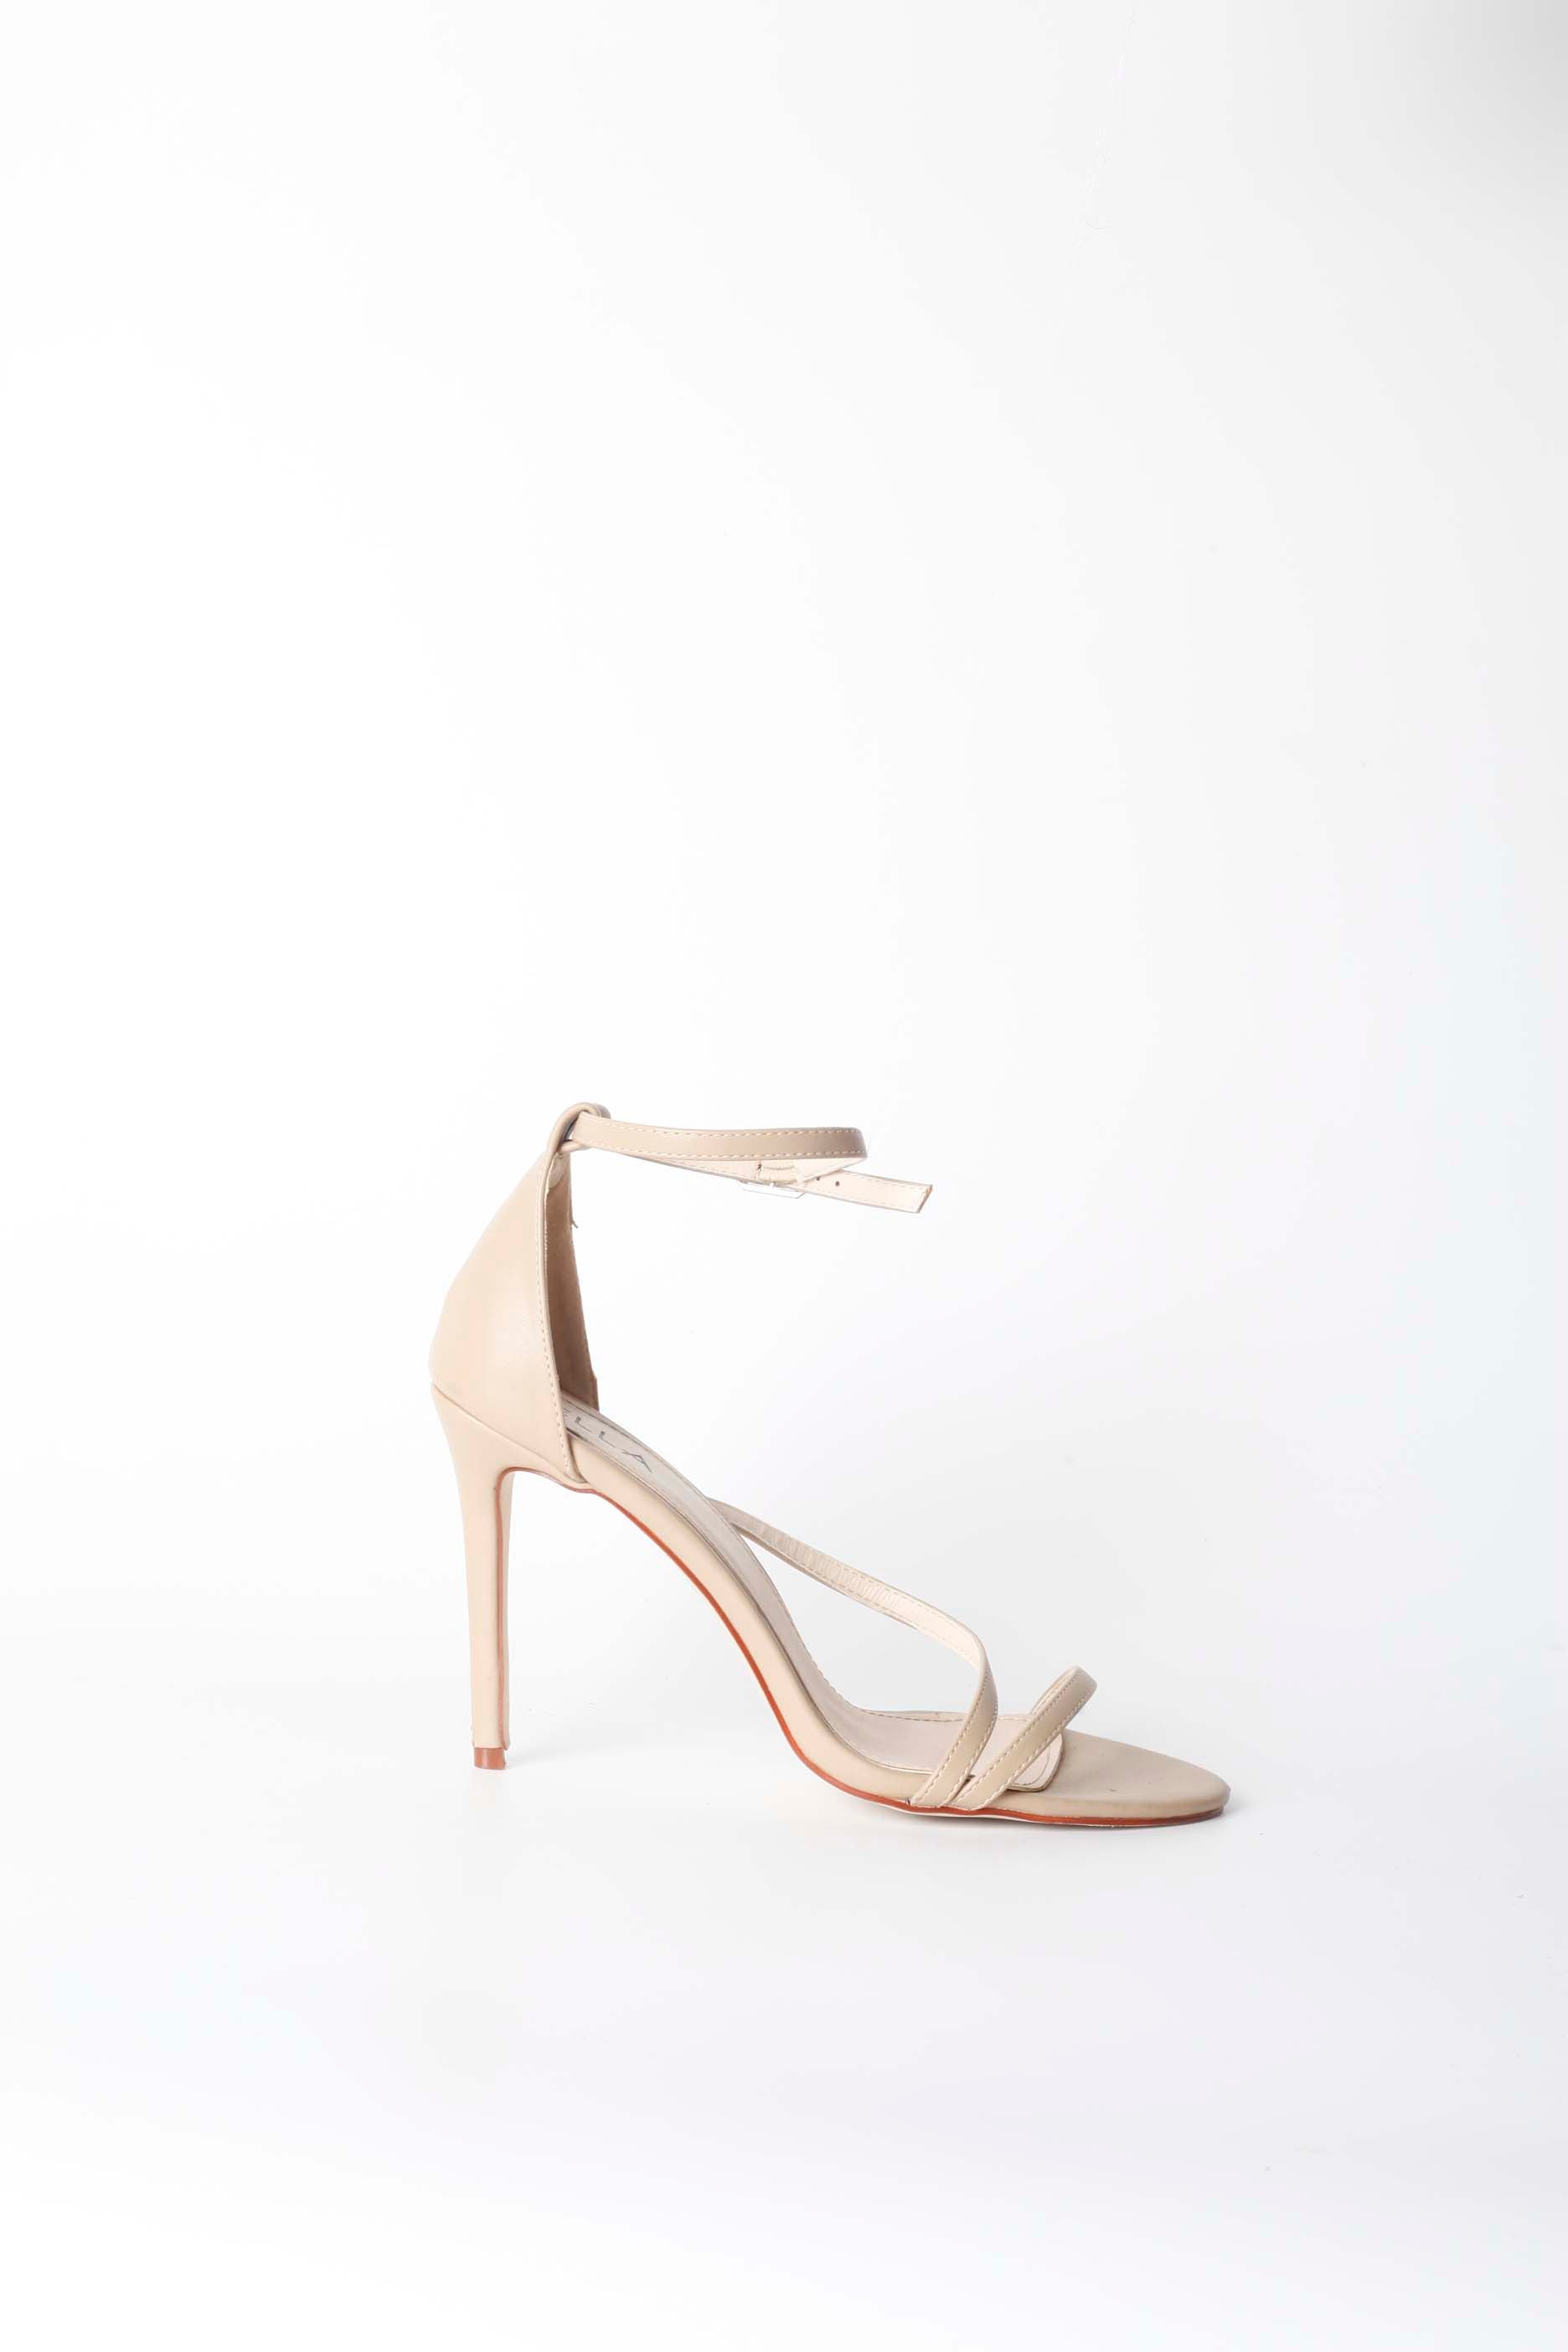 Nude Strappy High Heels